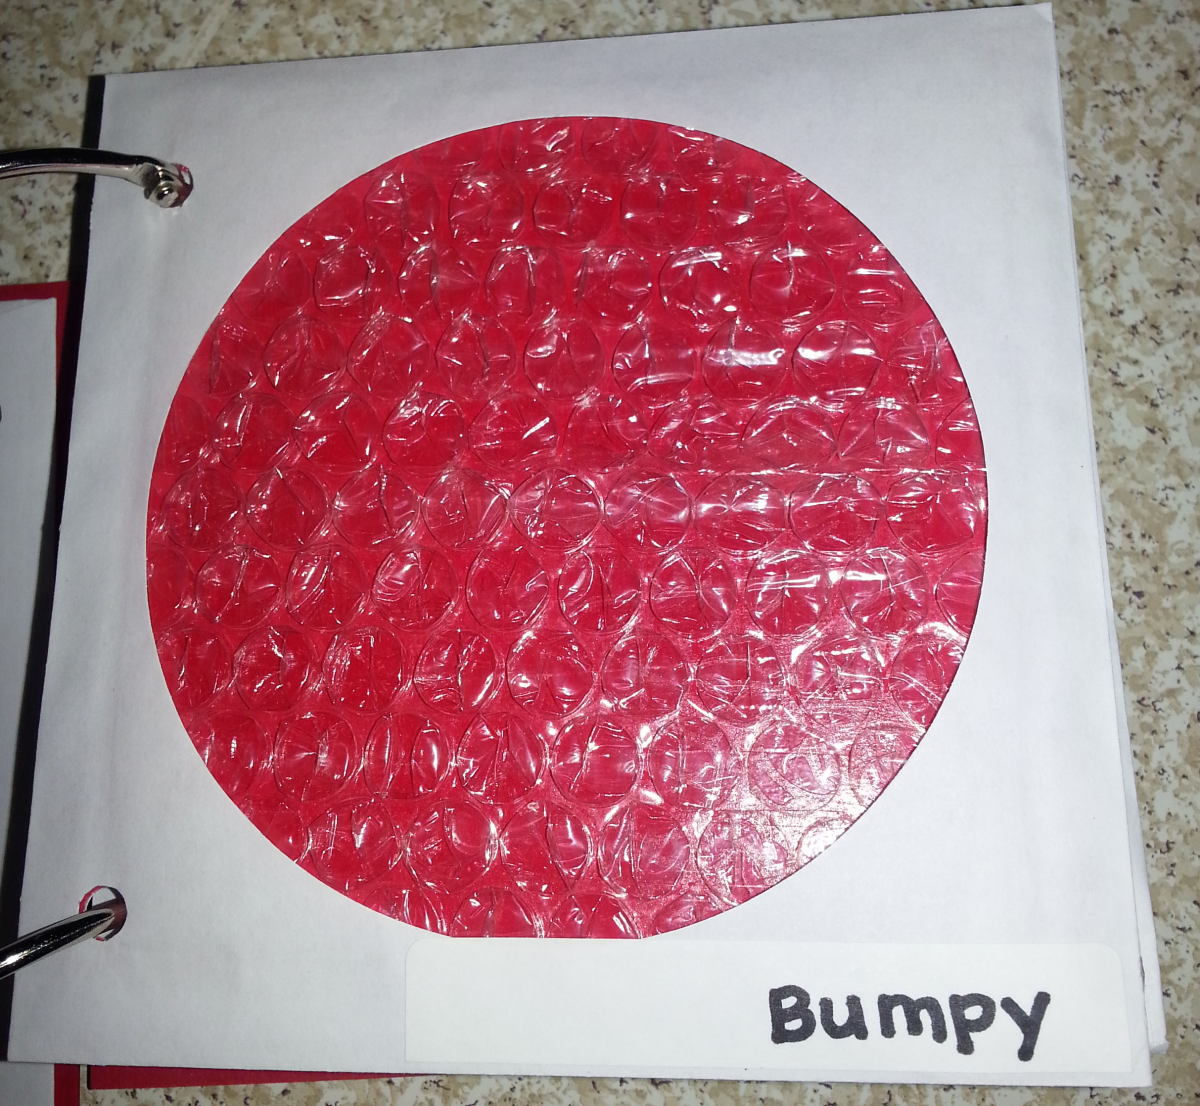 bumpy texture page with red circle and bubble wrap